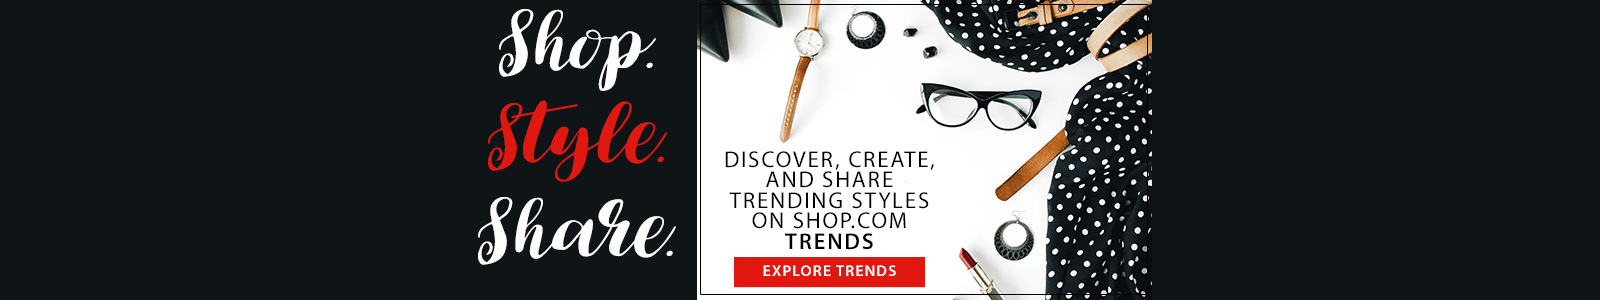 Shop Style Share discover, create, and share trending styles on Shop.com trends Explore Trends 